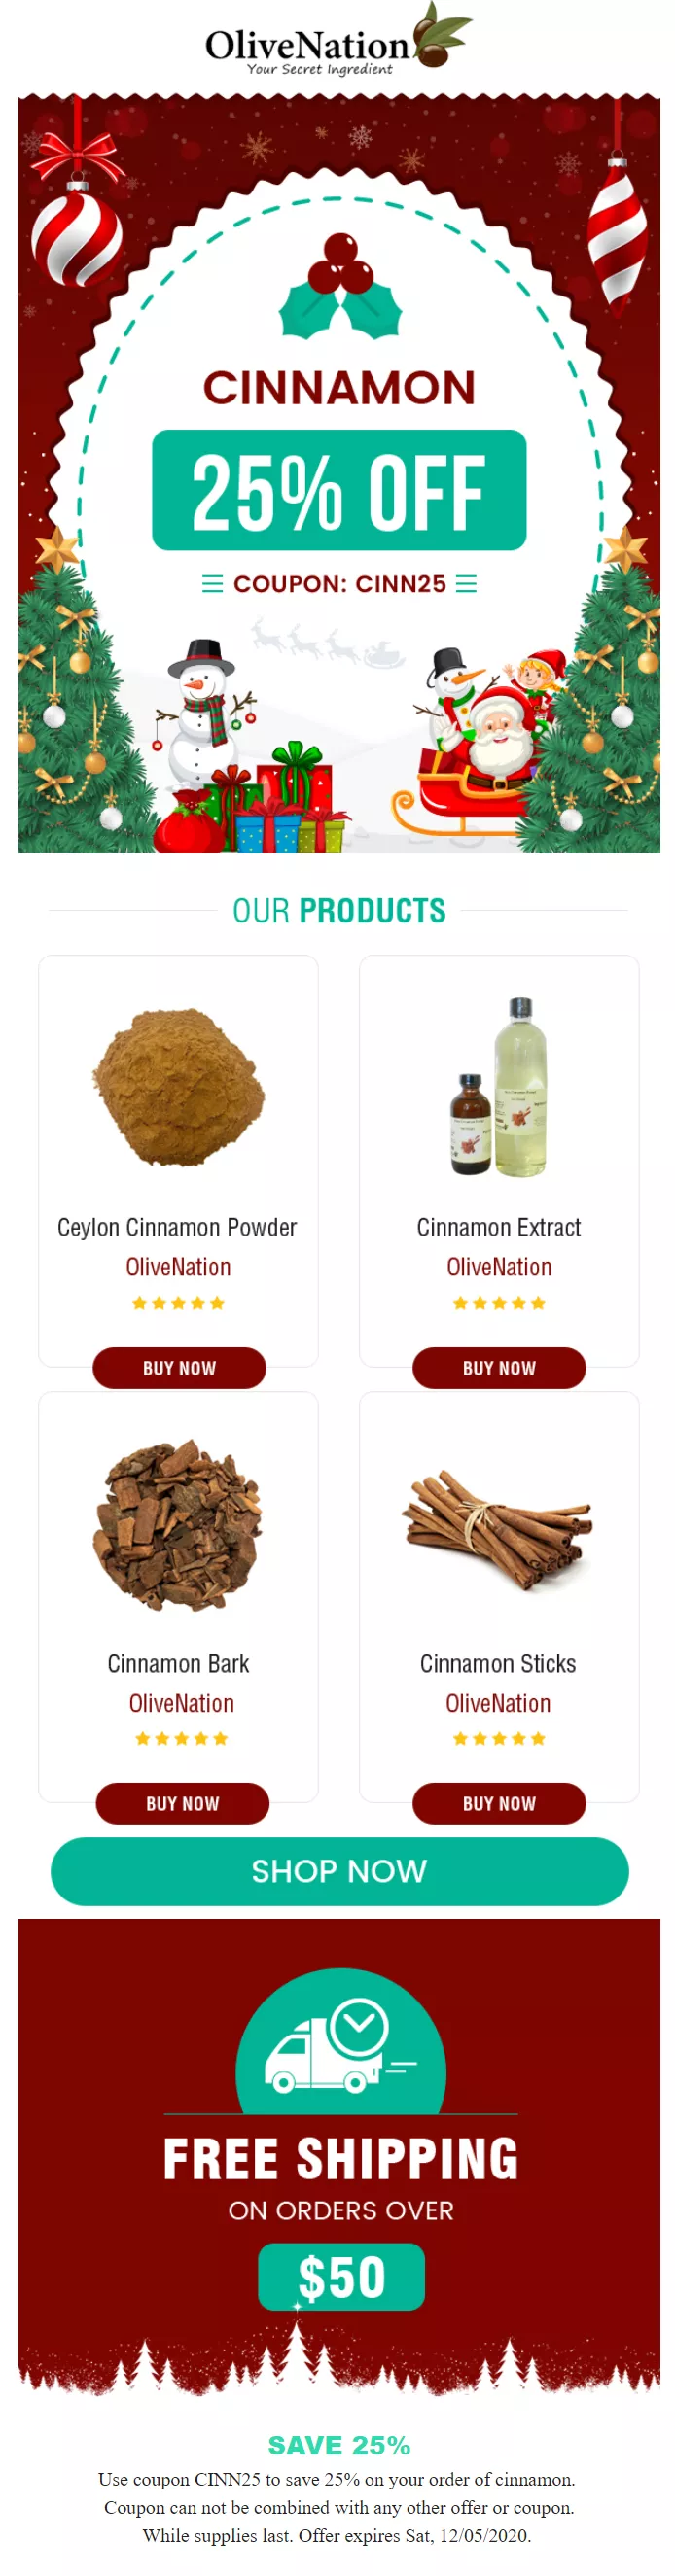 olive nation christmas email newsletter with promo code and cinnamon product highlights